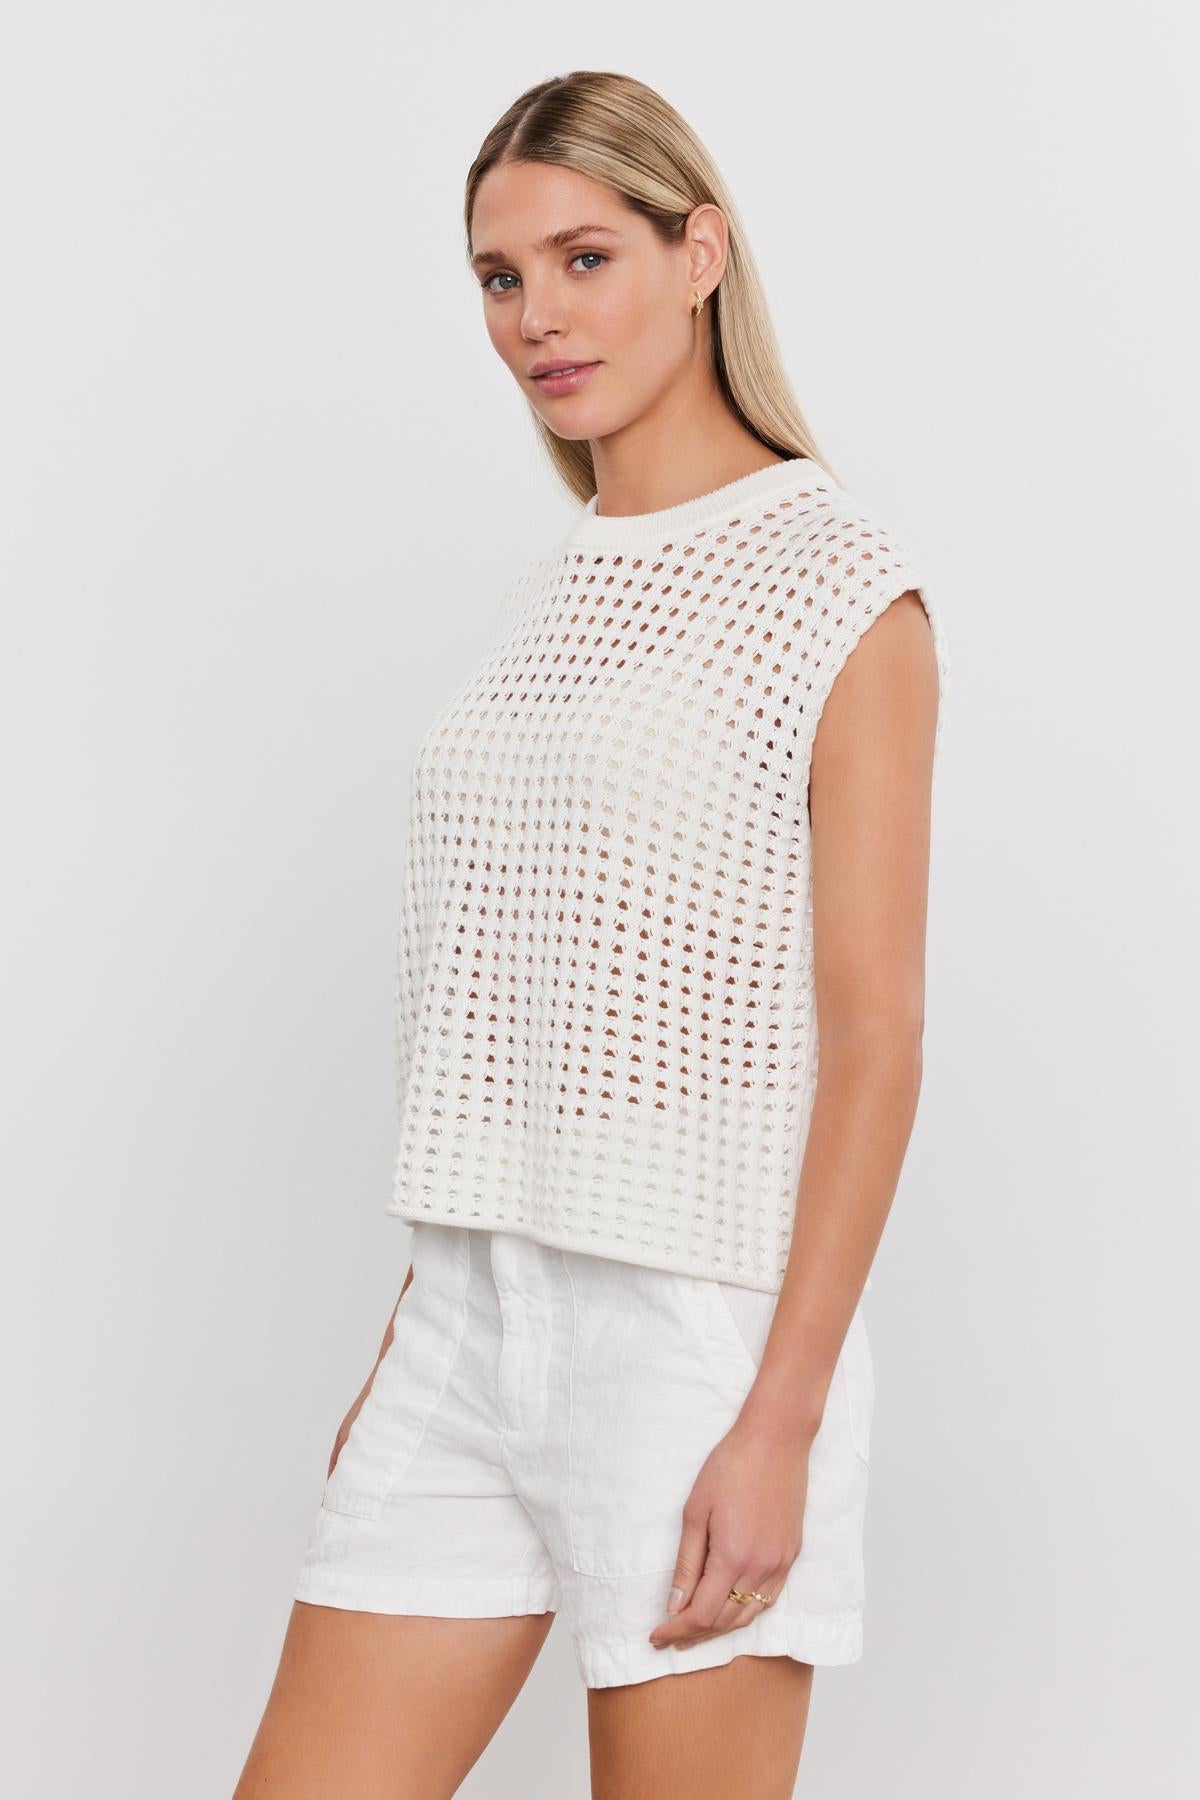   A person with long blond hair is wearing a white sleeveless MAISON SWEATER by Velvet by Graham & Spencer and white shorts, standing against a plain white background. 